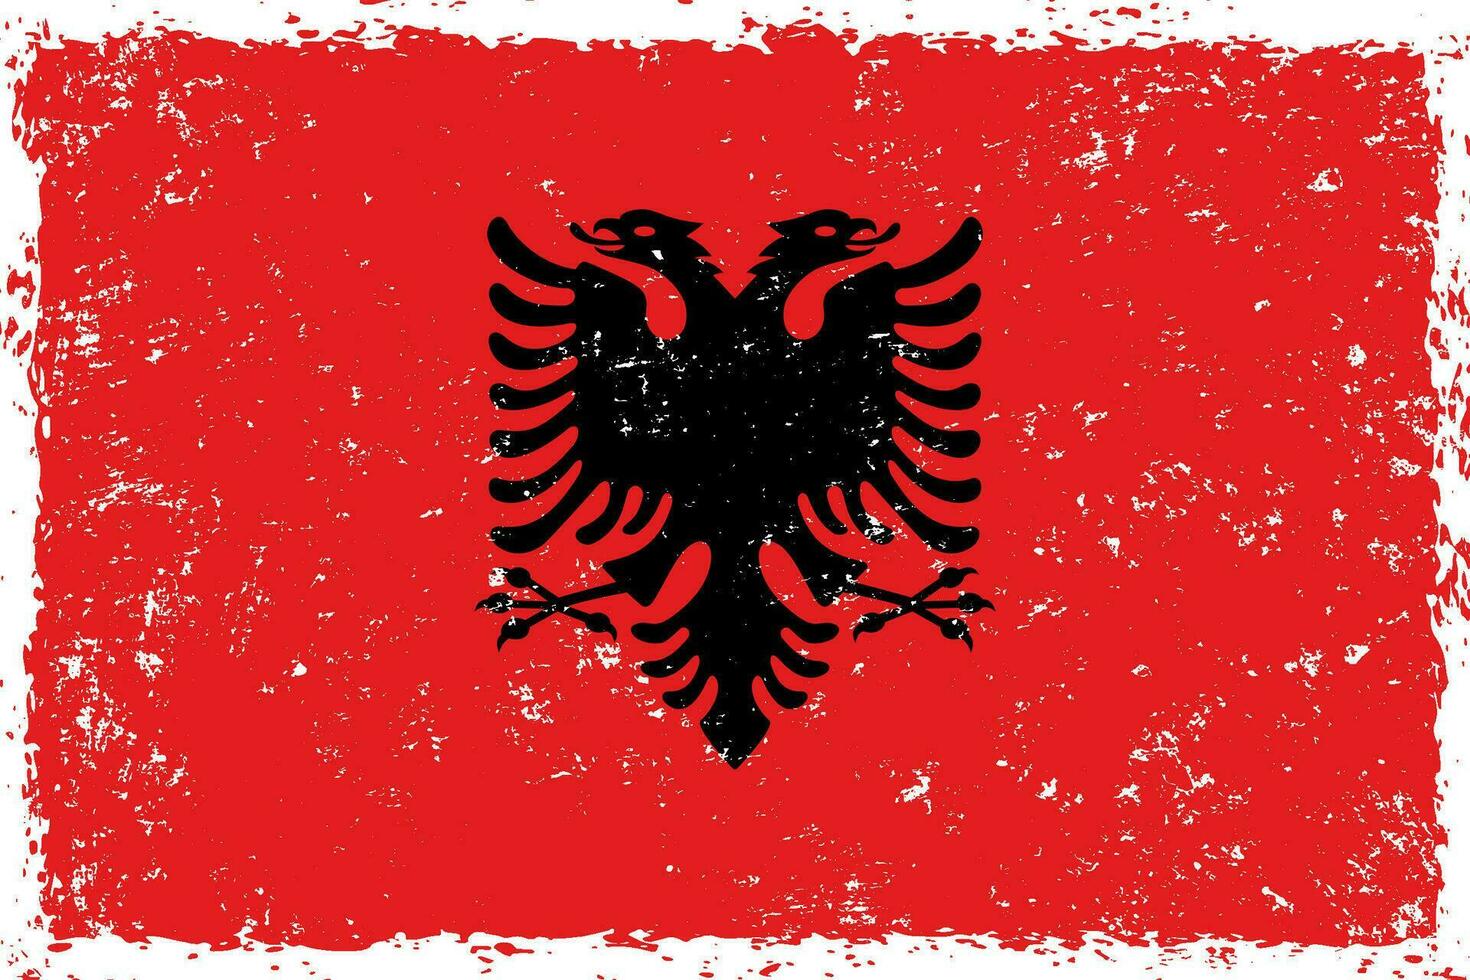 Albania flag grunge distressed style vector